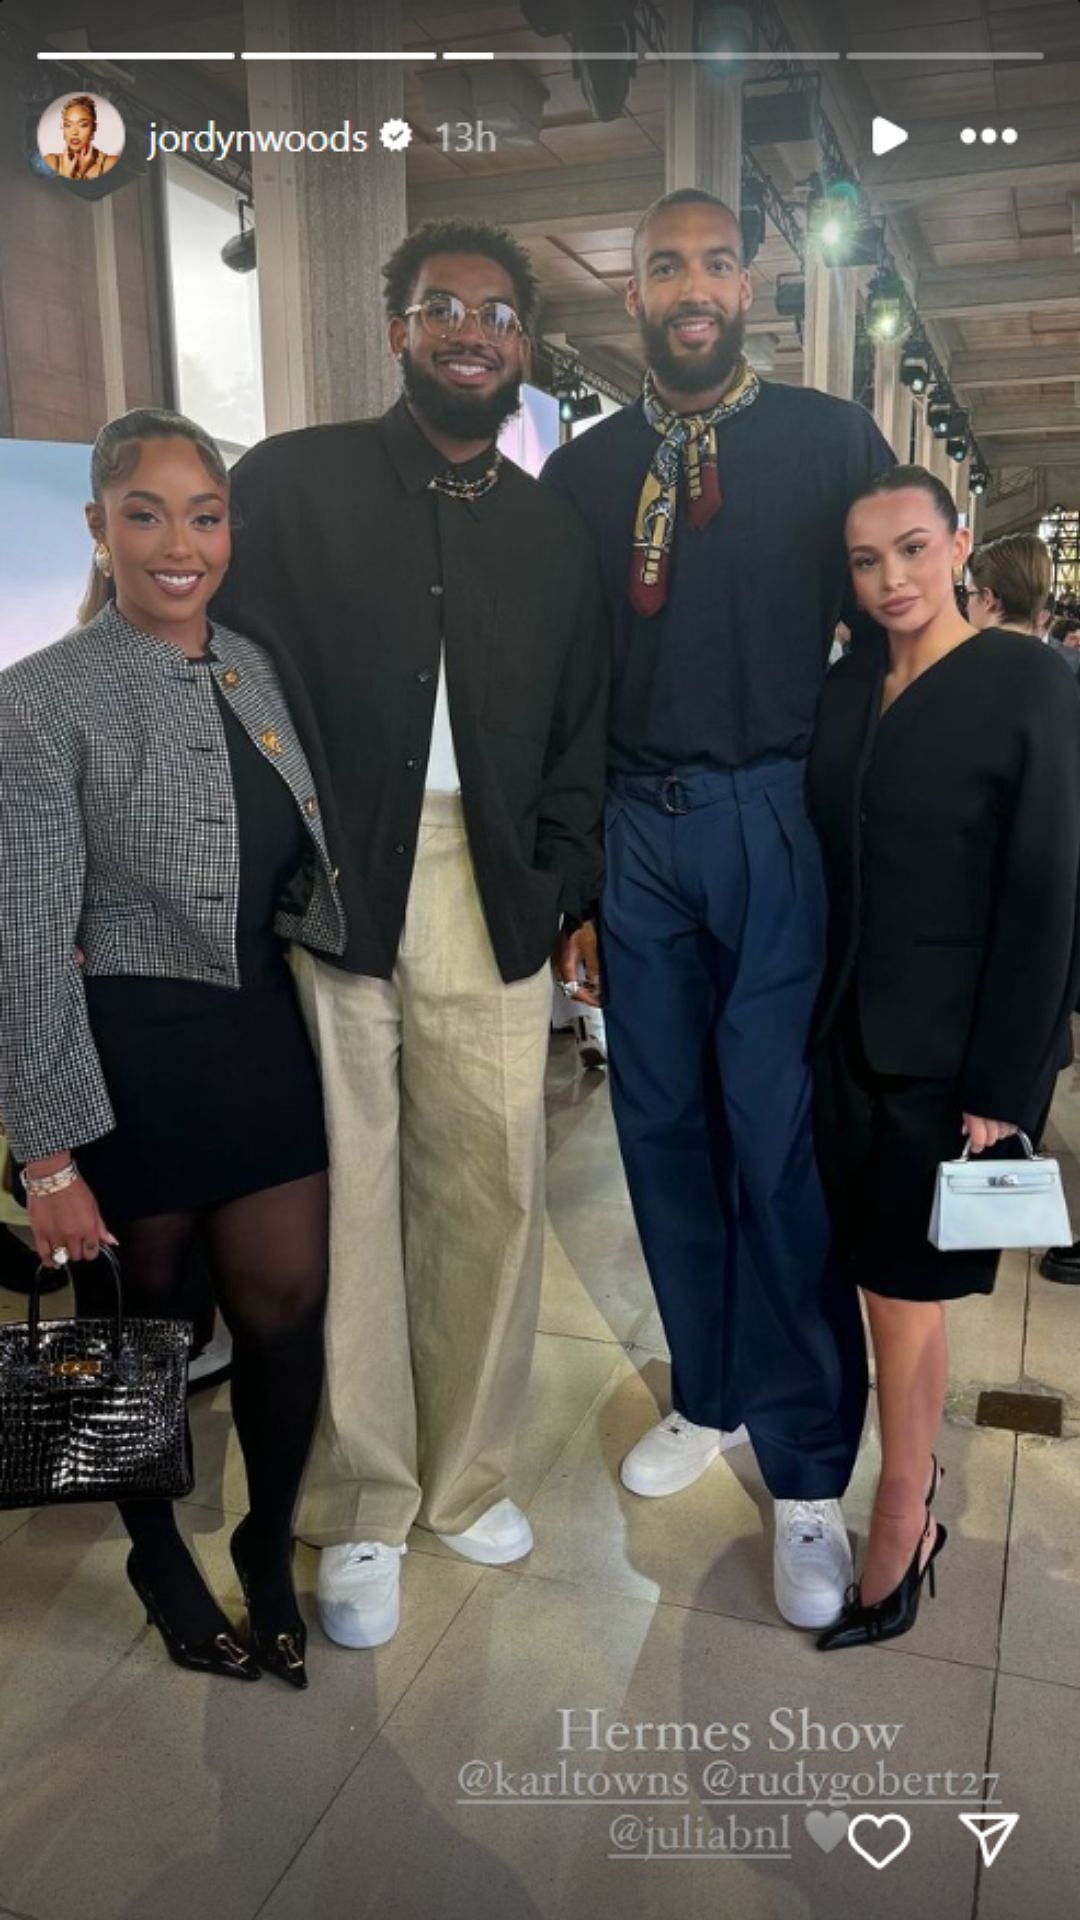 Timberwolves stars attend the Hermes show in Paris with their girlfriends (Image: Jordyn Woods Instagram)